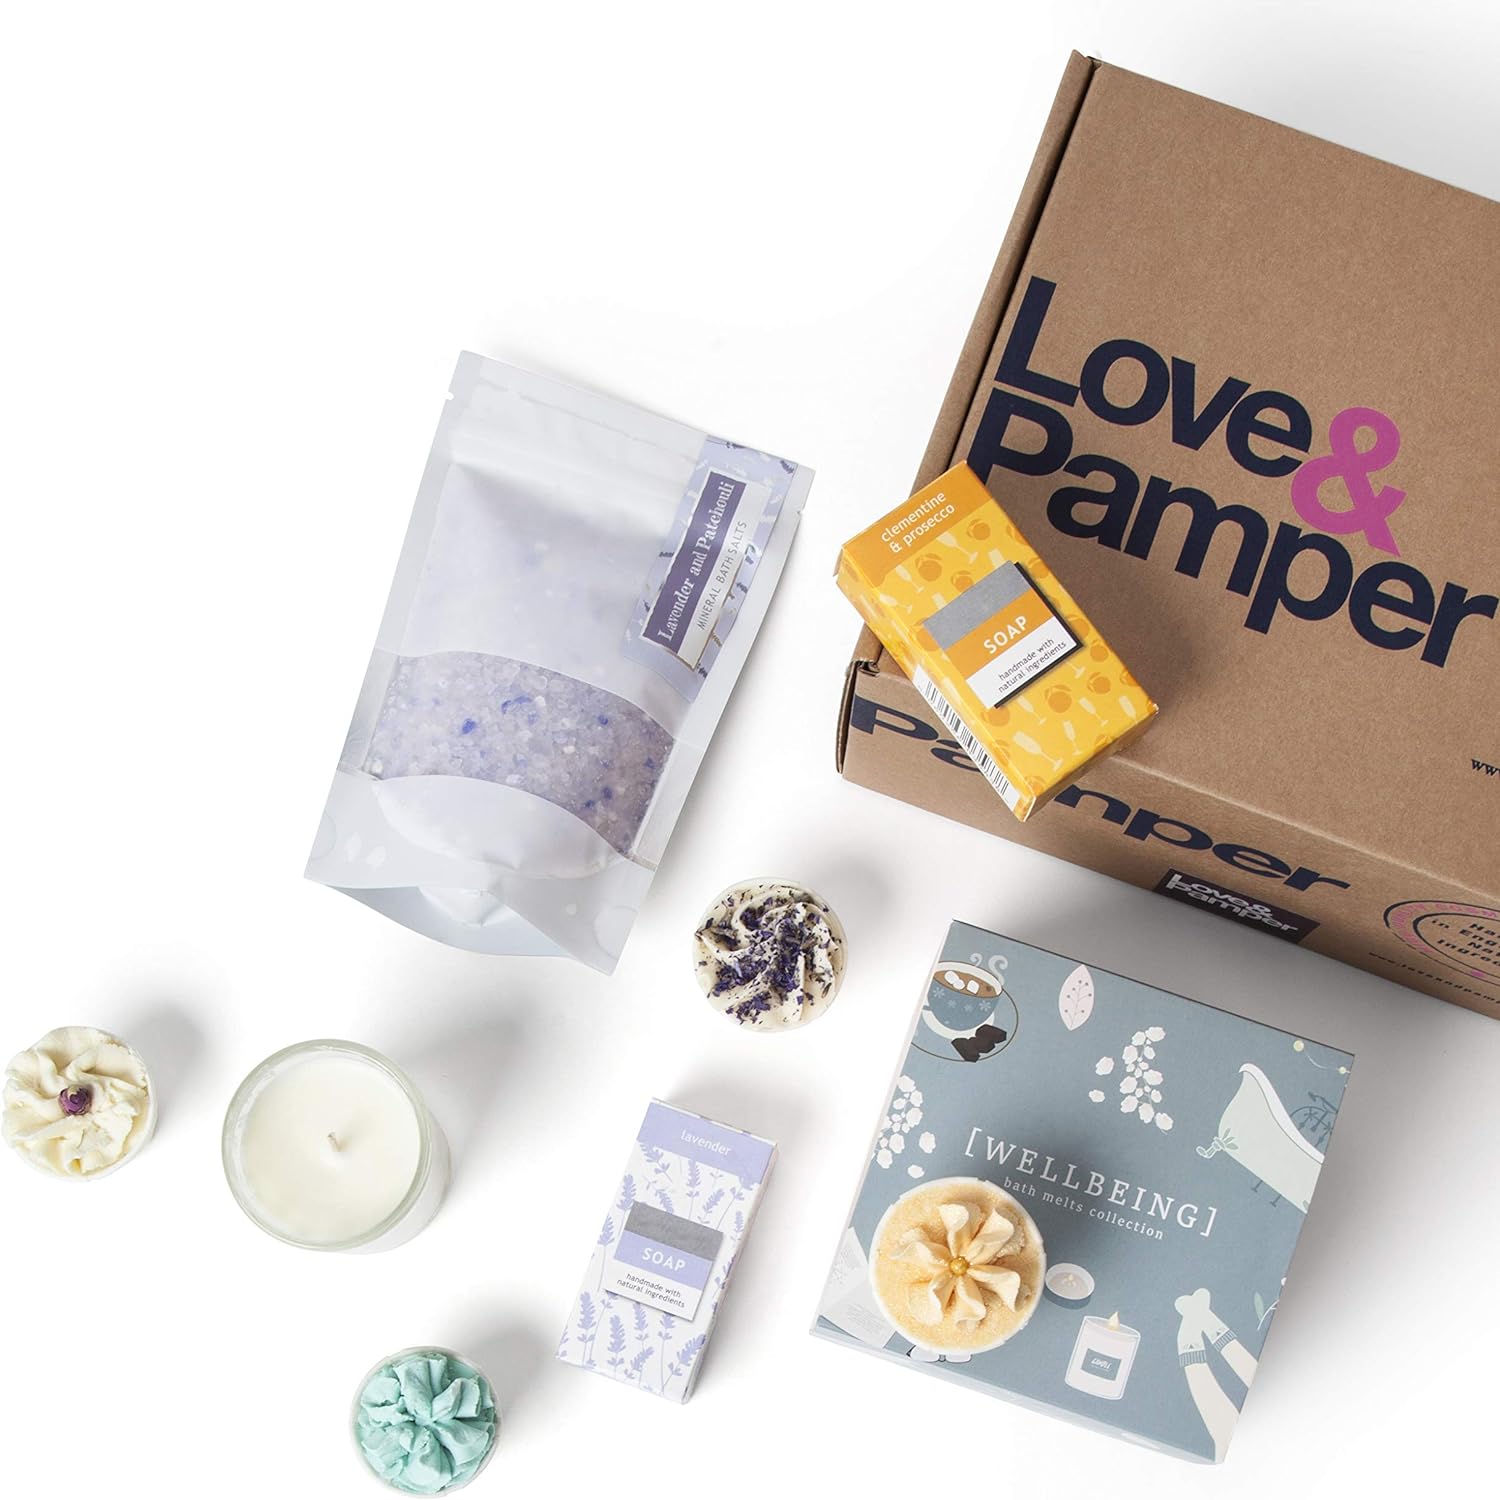 Love & Pamper - Hand Made Relaxation Pamper Wellbeing Gift Set, 4 Relaxation Bath Melts, Dead Sea Bath Salts, Lavender/Patchouli, Soy Wax Candle, Wild Honeysuckle, Lavender Soap, Sweet Orange Soap - 8588